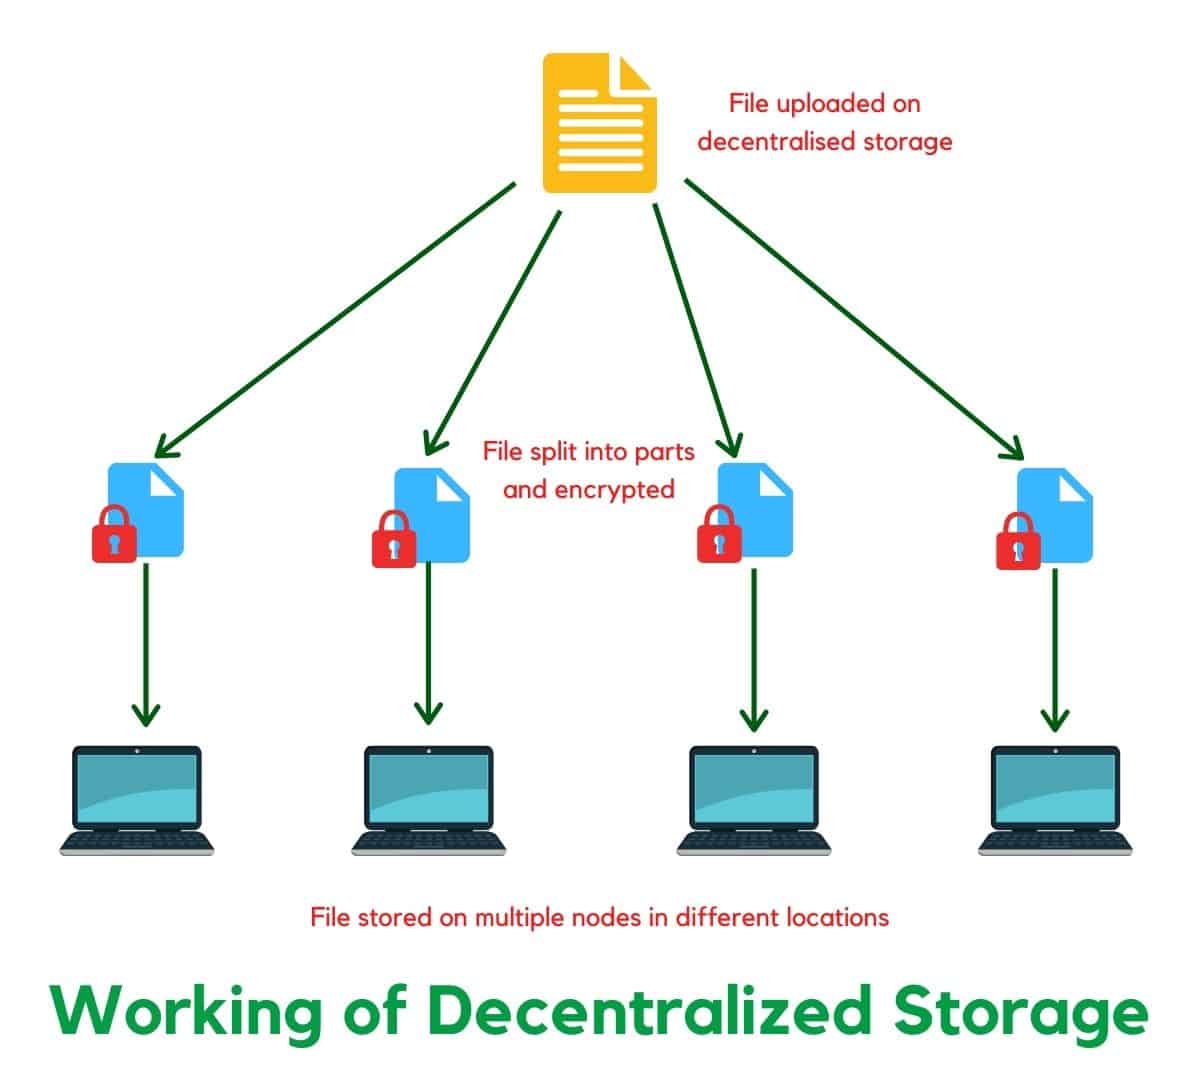 Decentralized Data Storage - What is it and How Does it Work